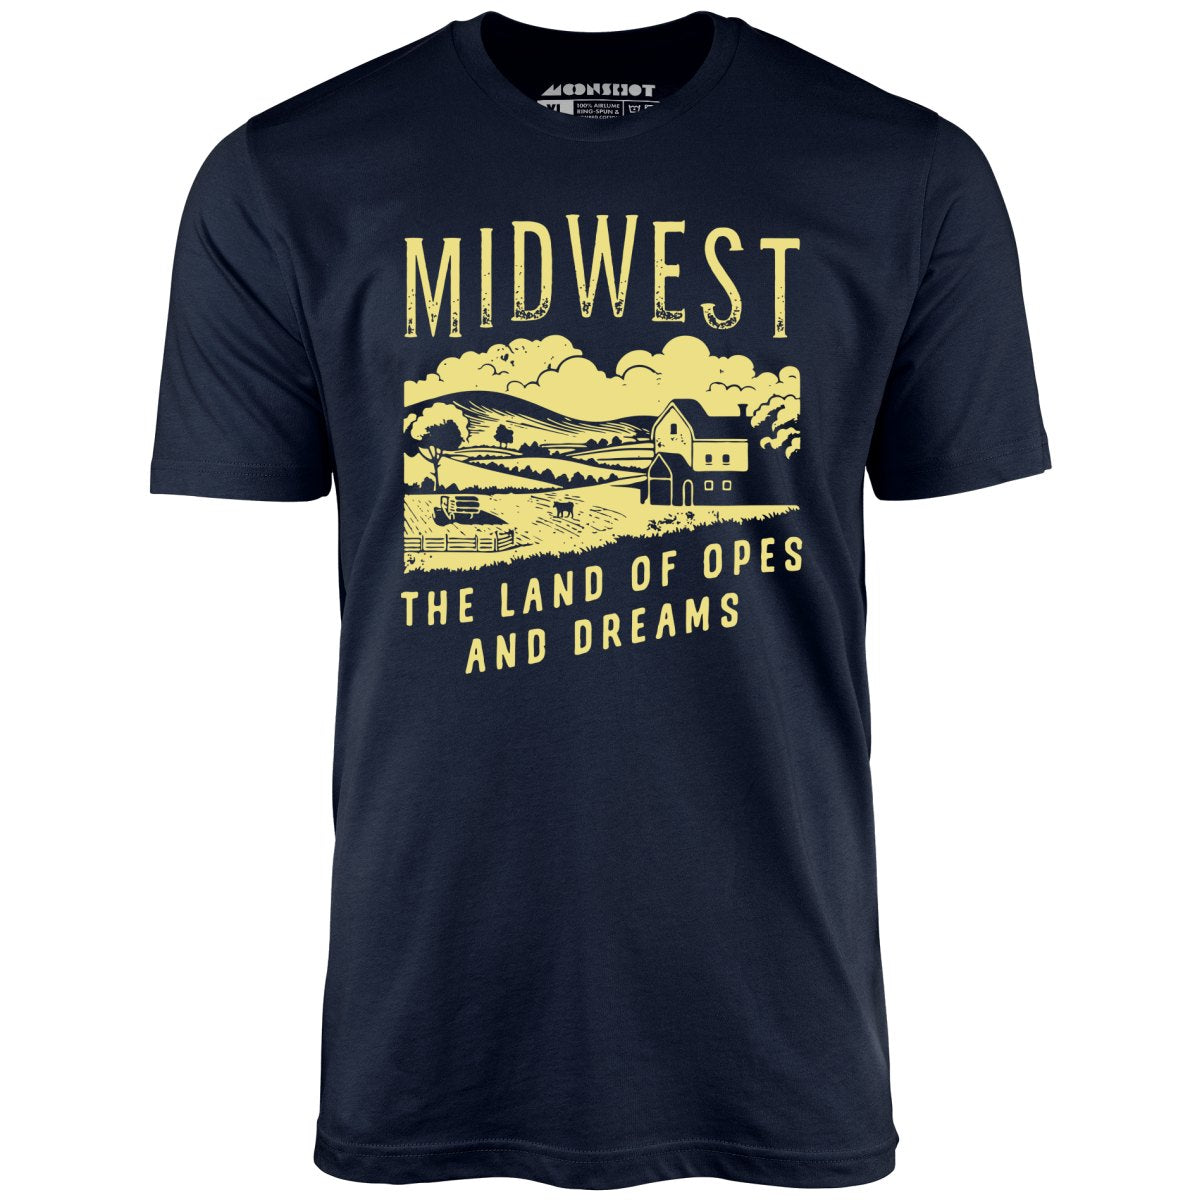 Midwest The Land of Opes and Dreams - Unisex T-Shirt